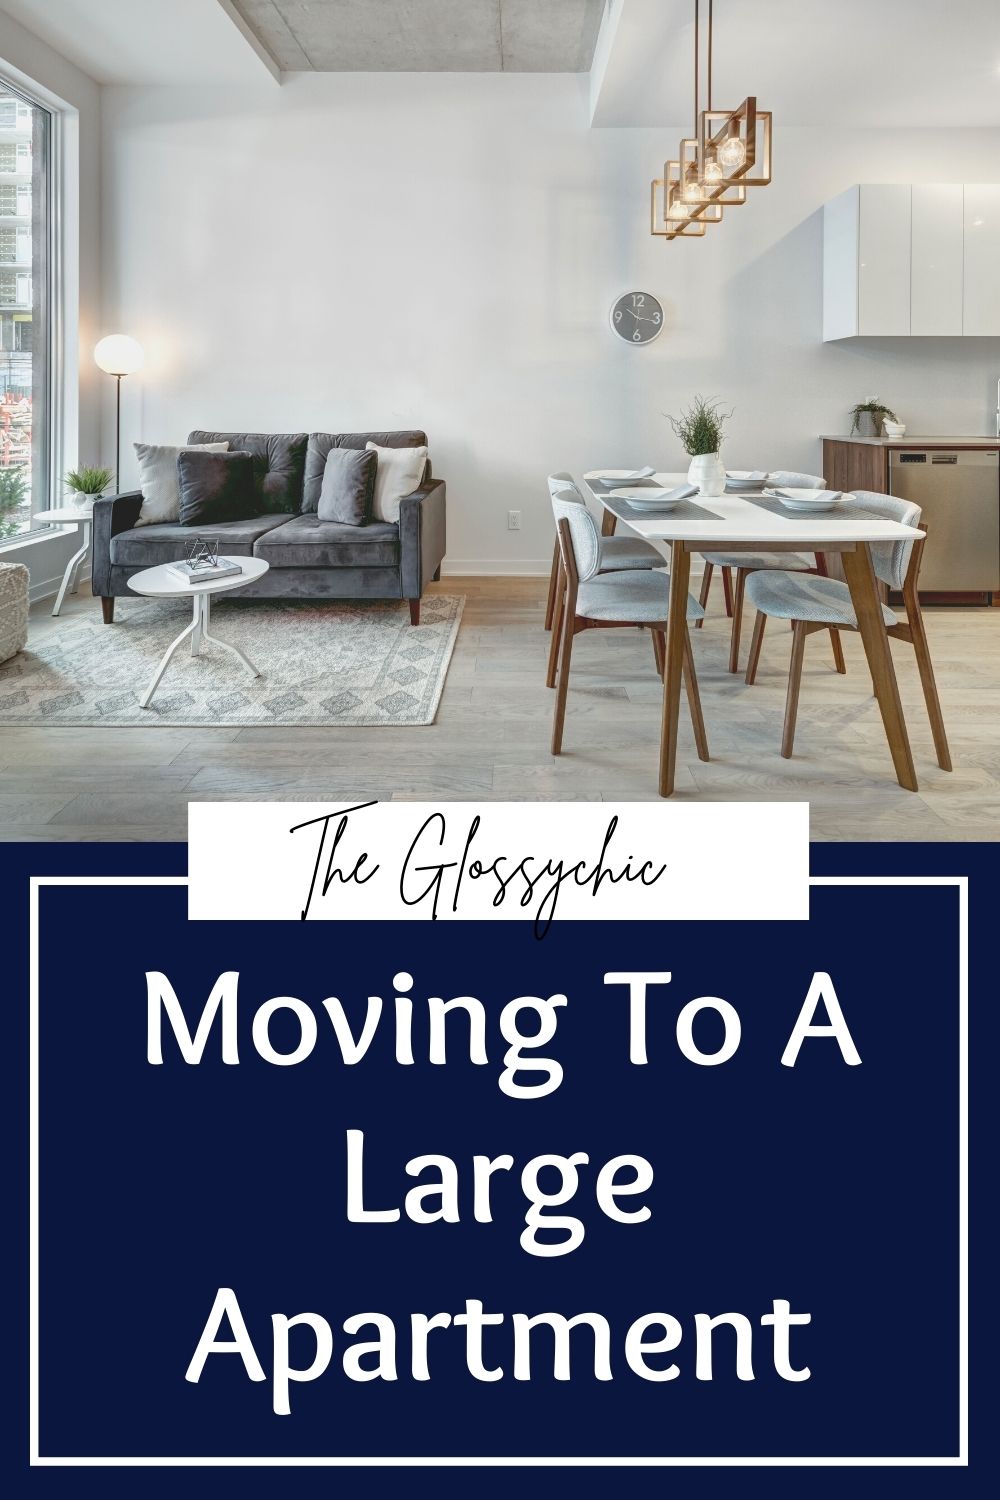 Moving To A Large Apartment – The Main Nuances